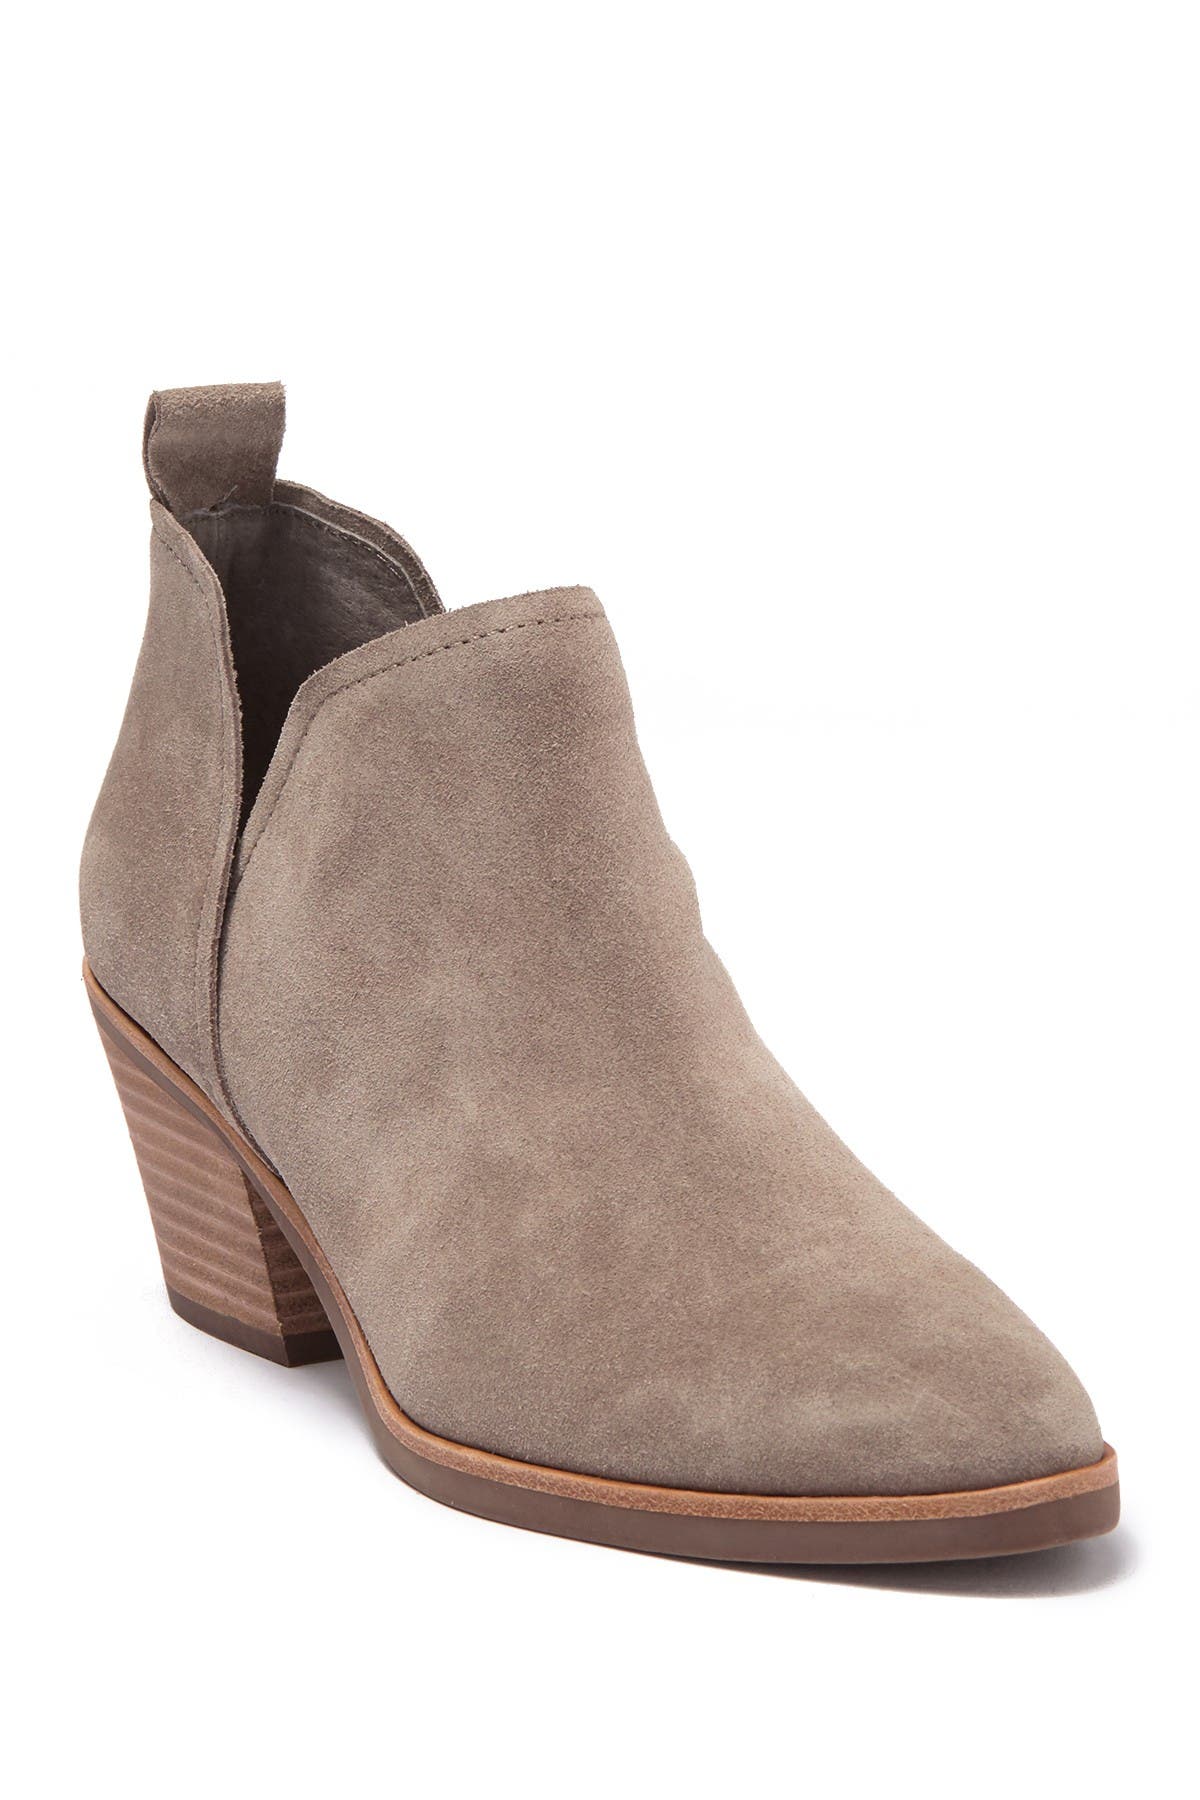 Dolce Vita | Eve Suede Ankle Bootie 